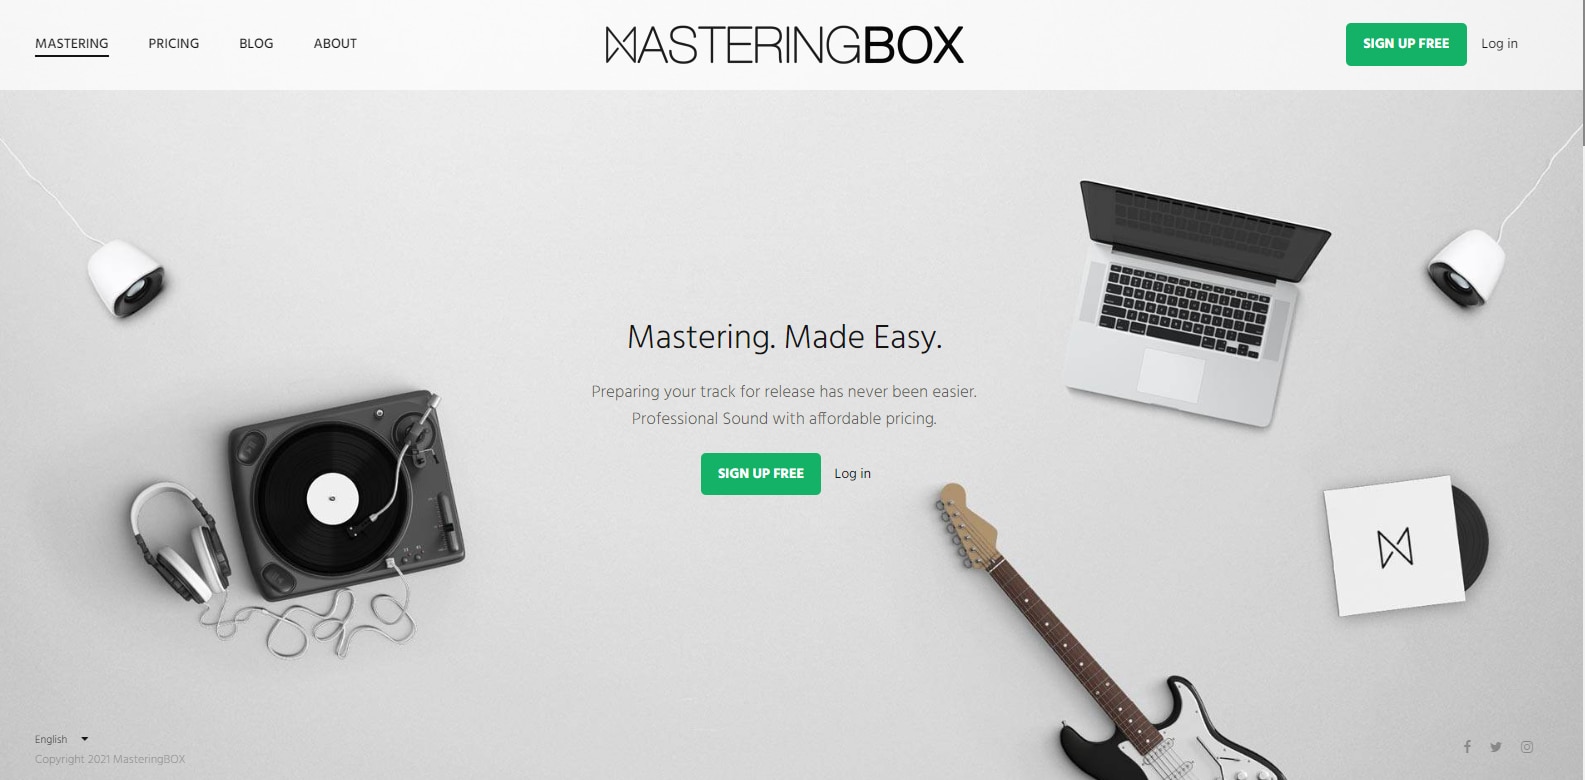 song mastering online free with the mastering boxr